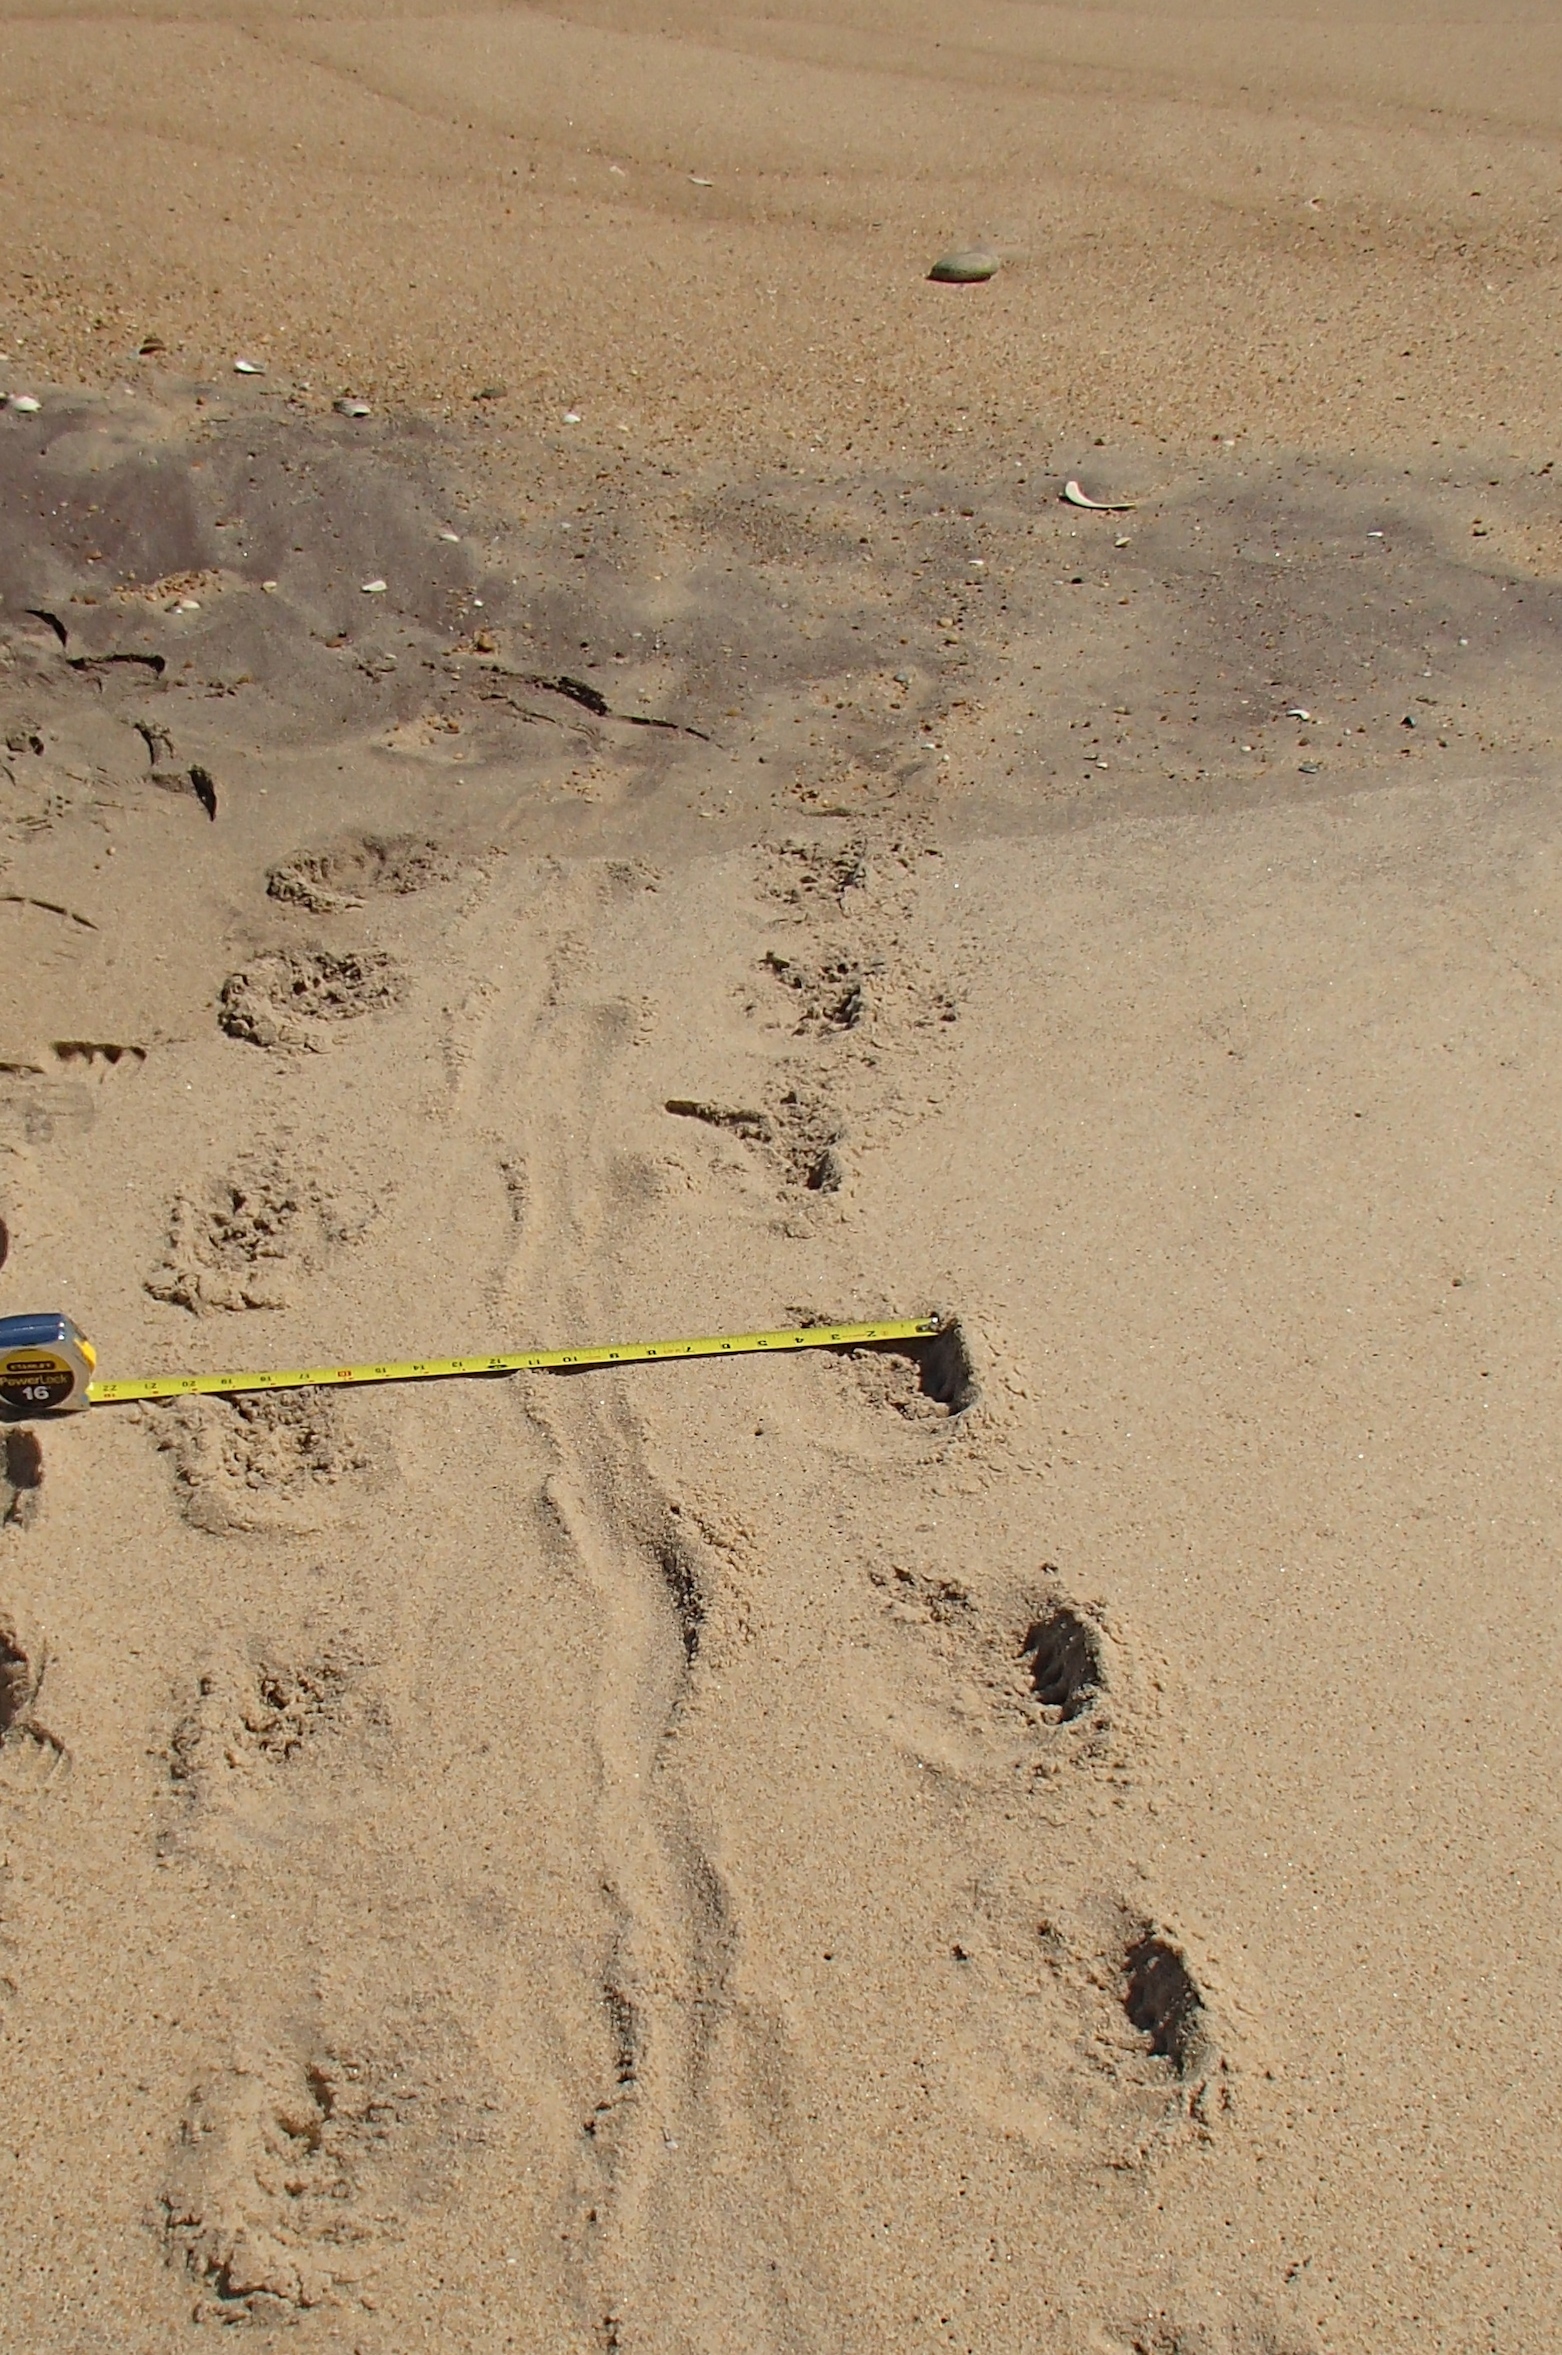 Photo 4: This 20 inch-wide track has five claw marks arranged parallel to the direction of travel: seal.